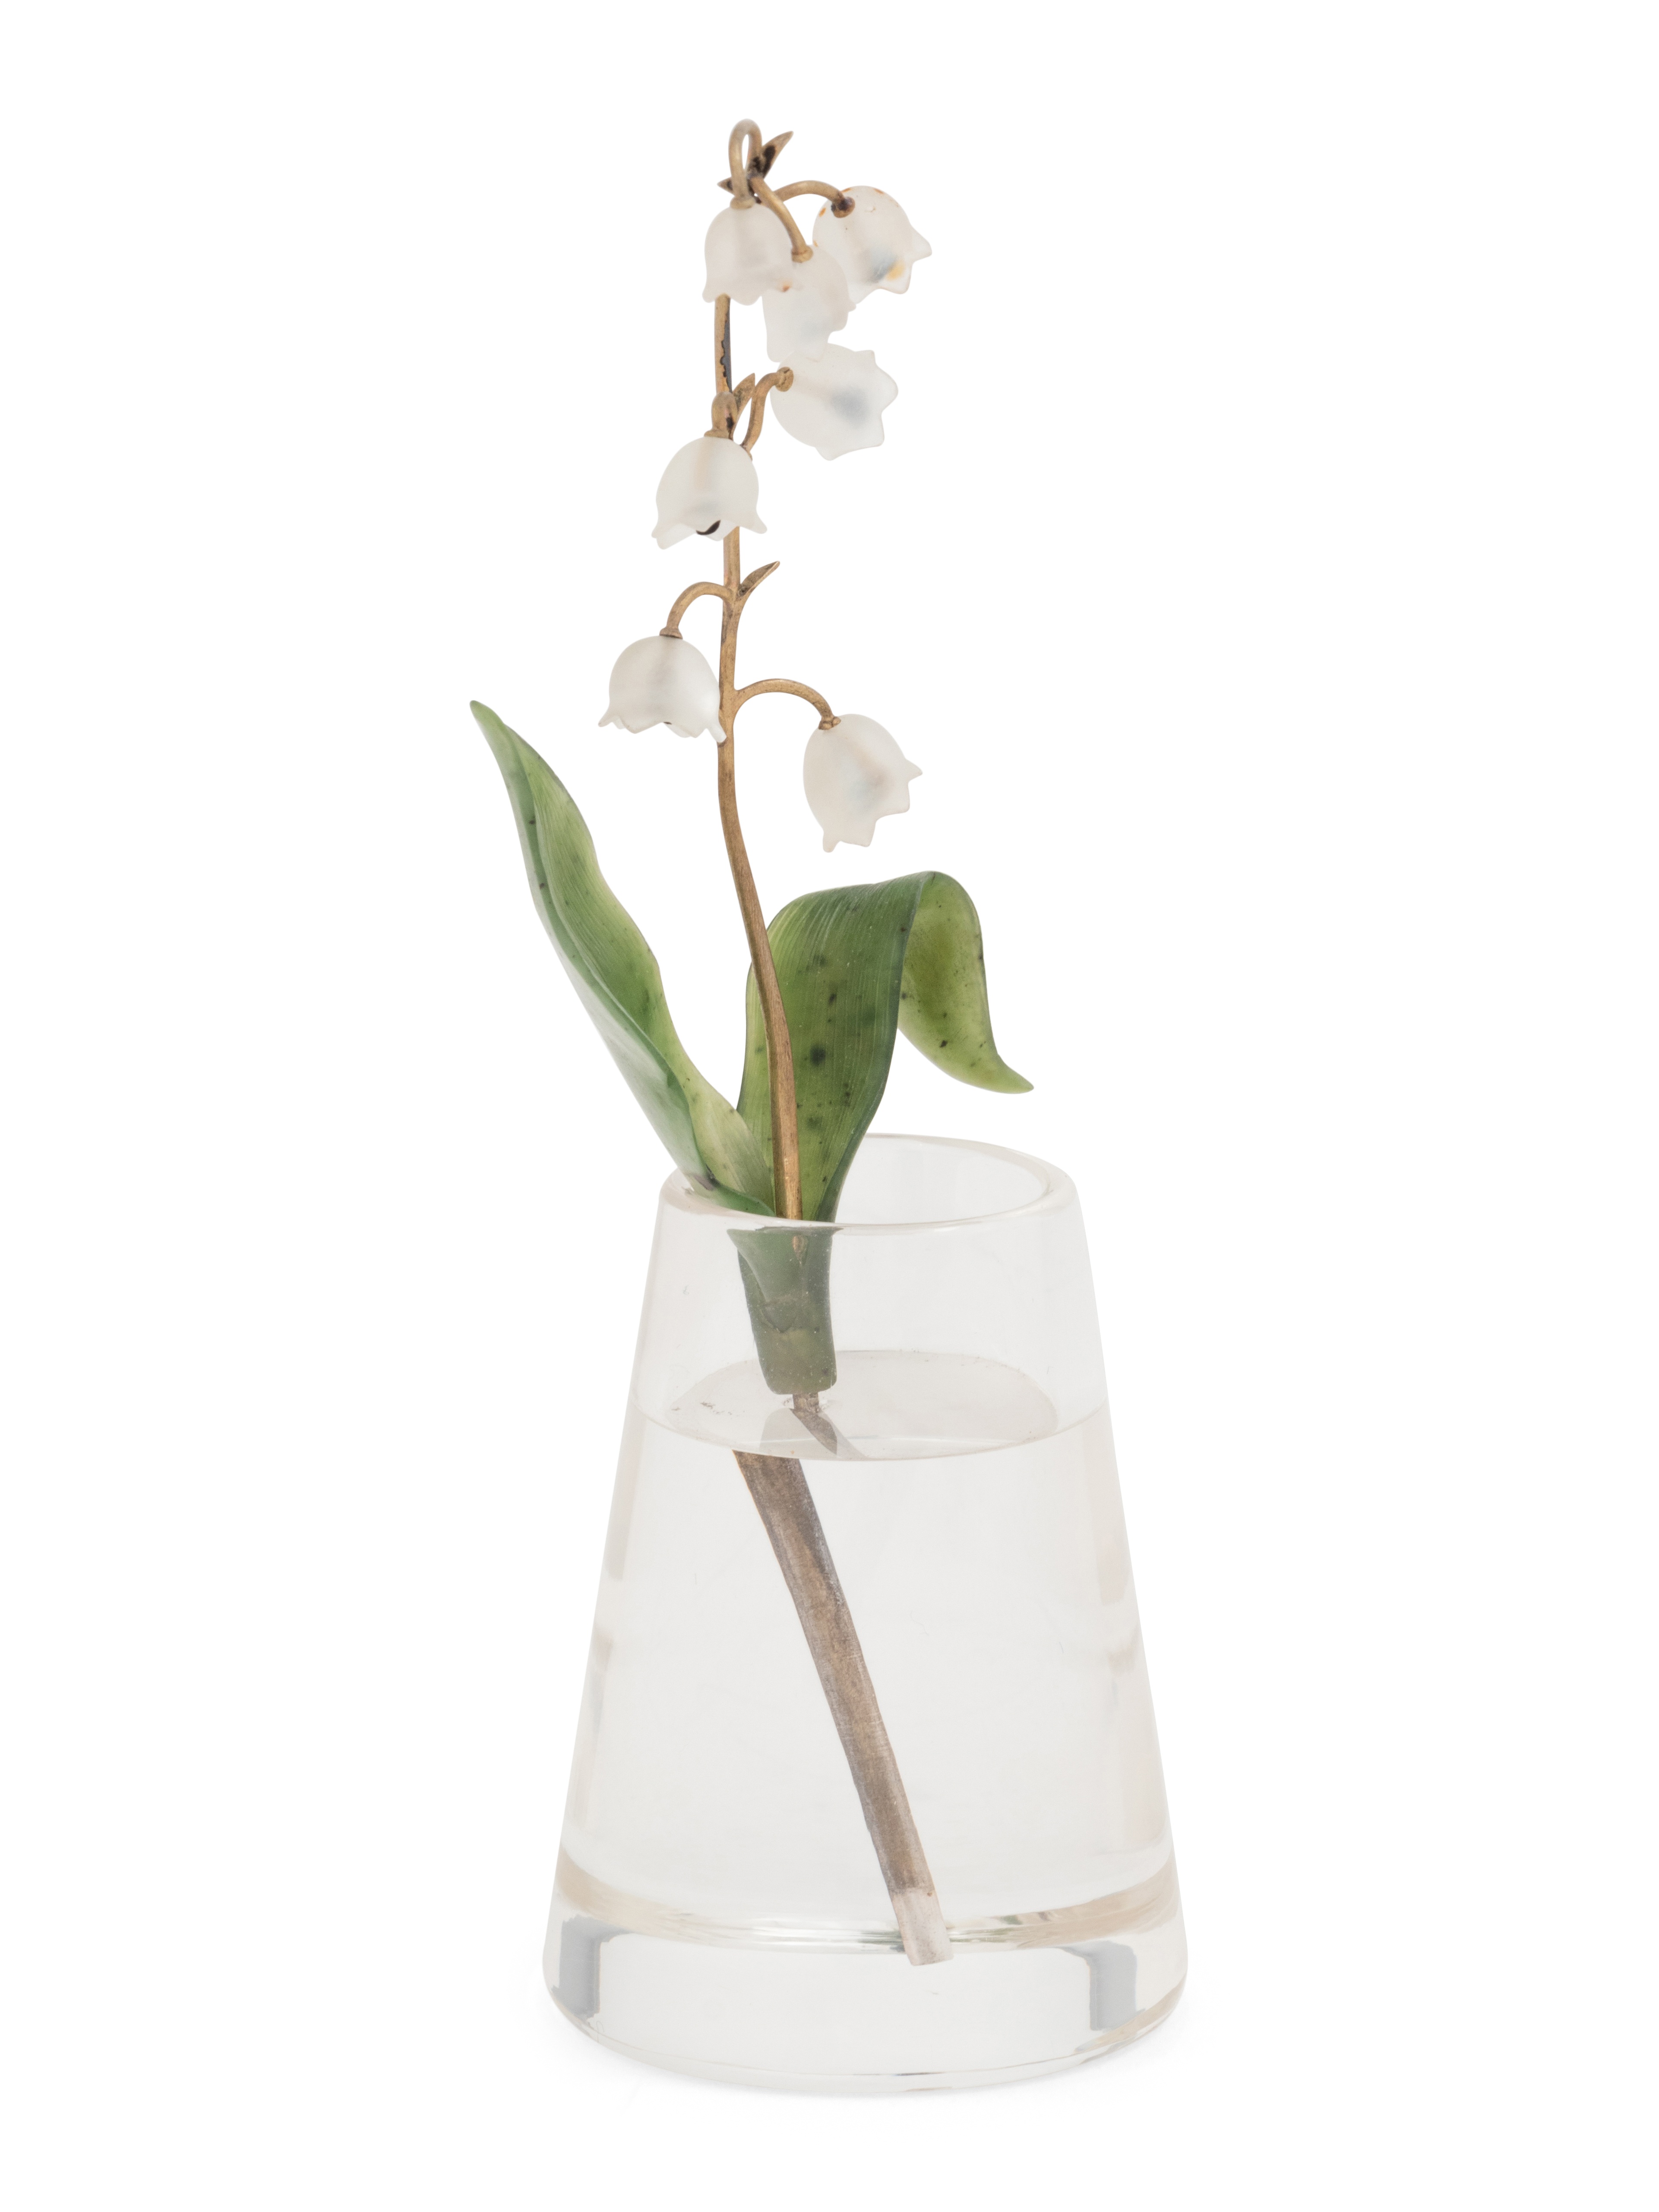 An Important Cartier Carved Rock Crystal, Aventurine and Moonstone Lily of the Valley Flower Study - Image 2 of 20